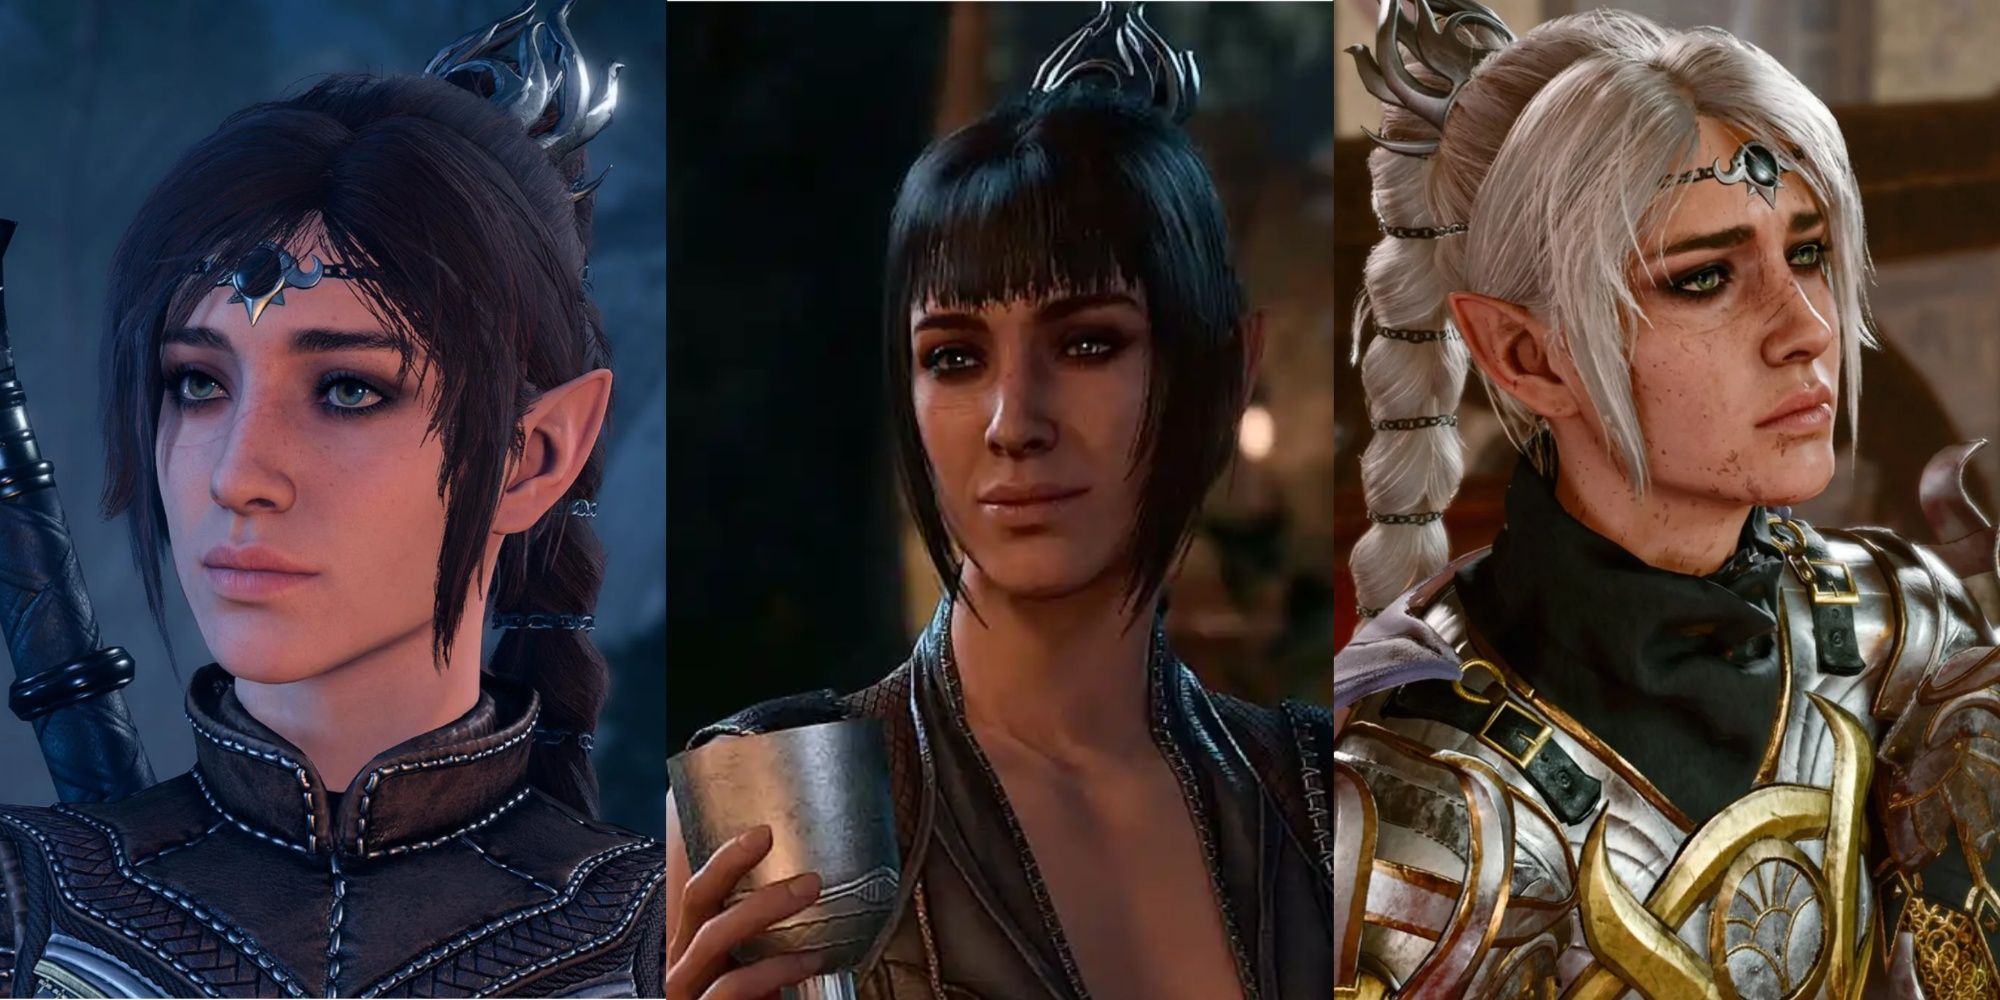 3 images of Shadowheart with each hairstyle she can have in the game